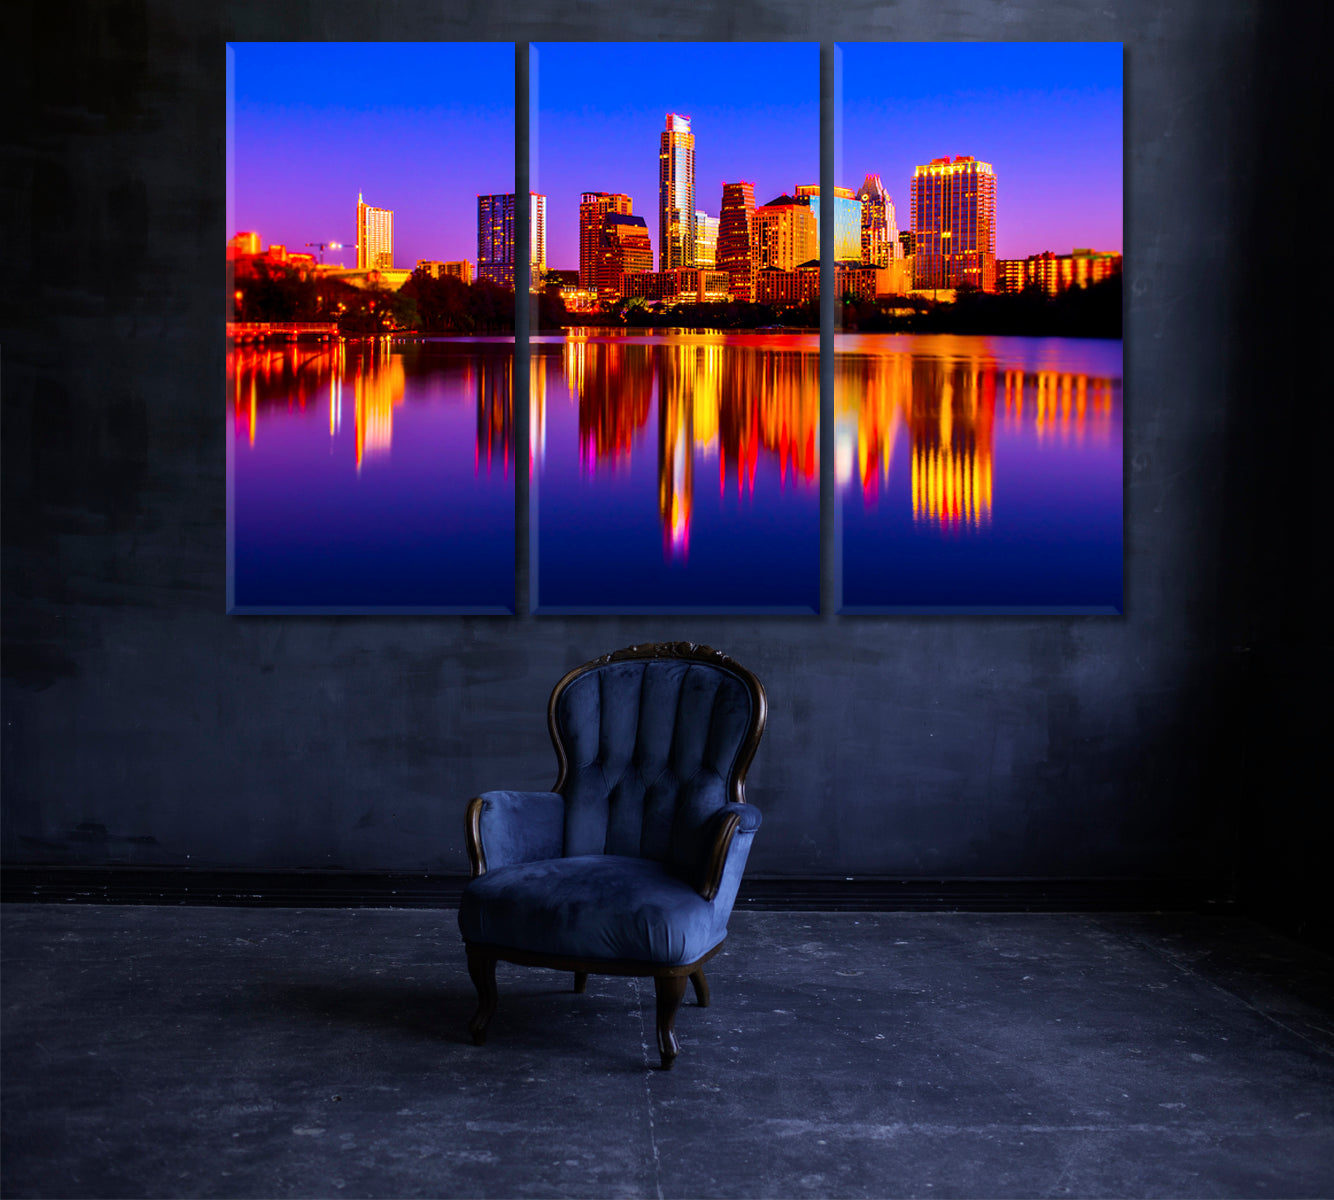 Reflections Of City Lights At Night Austin Texas Canvas Print ArtLexy 3 Panels 36"x24" inches 